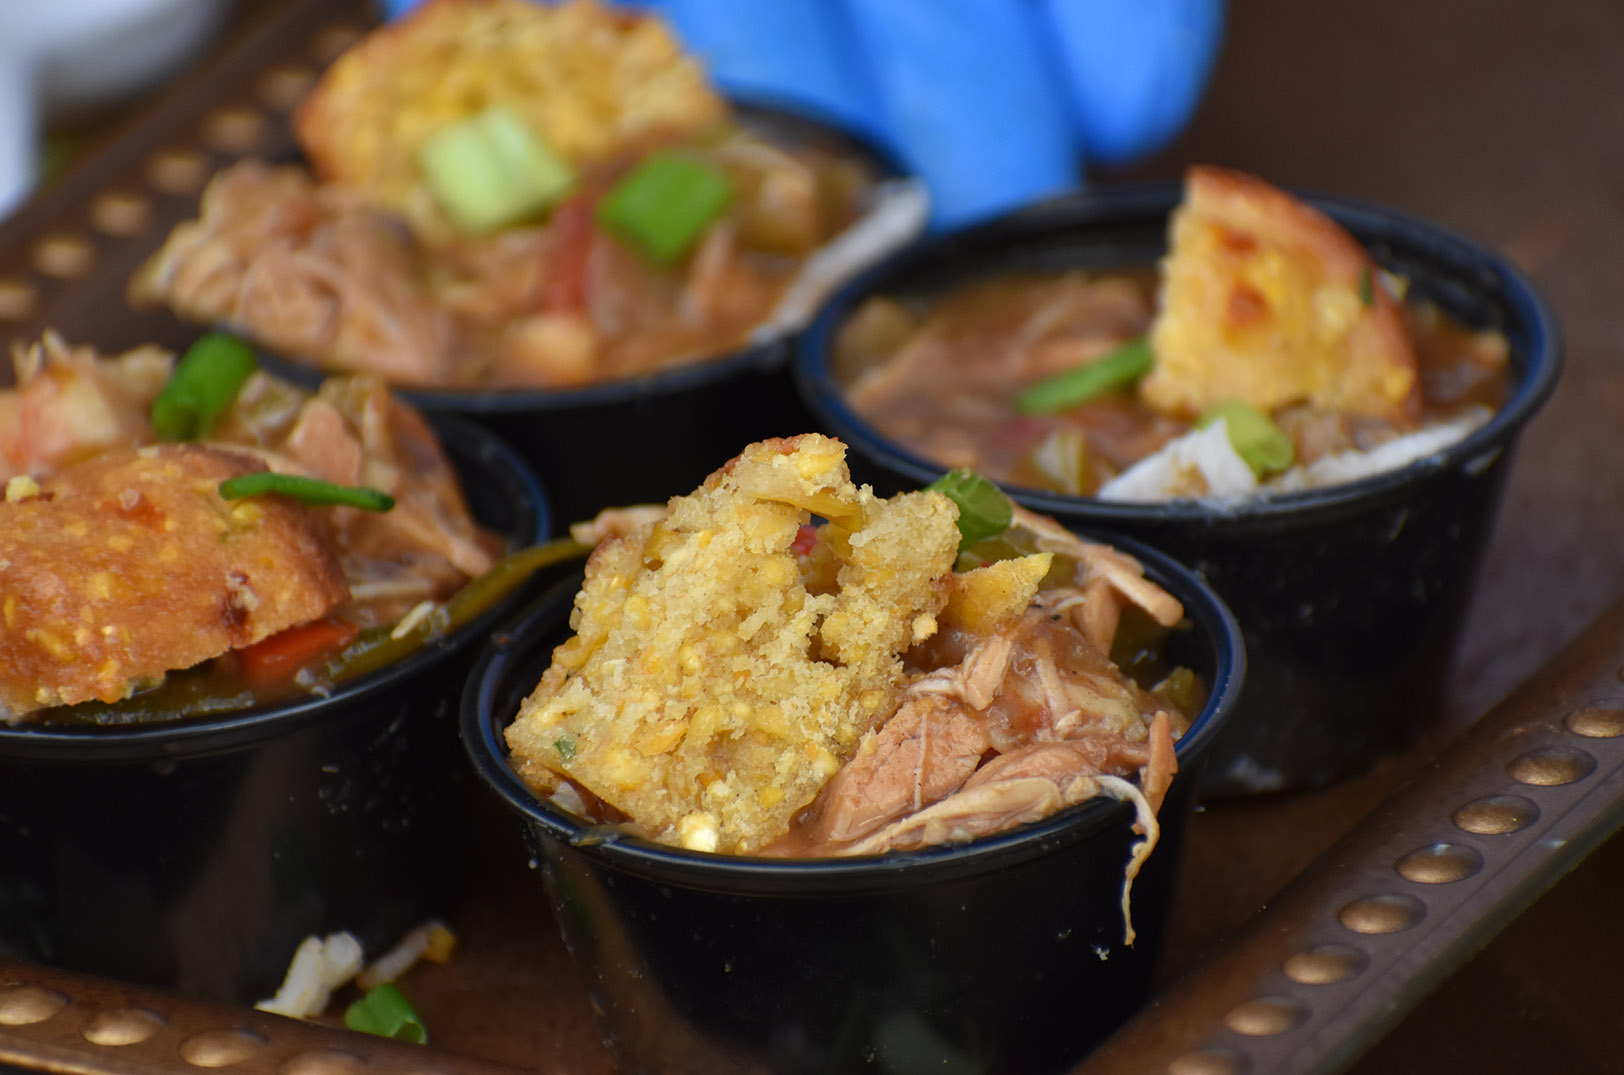 This gumbo hits The Spot: How Prospect KC’s own students cooked up a prize-winning competition entry